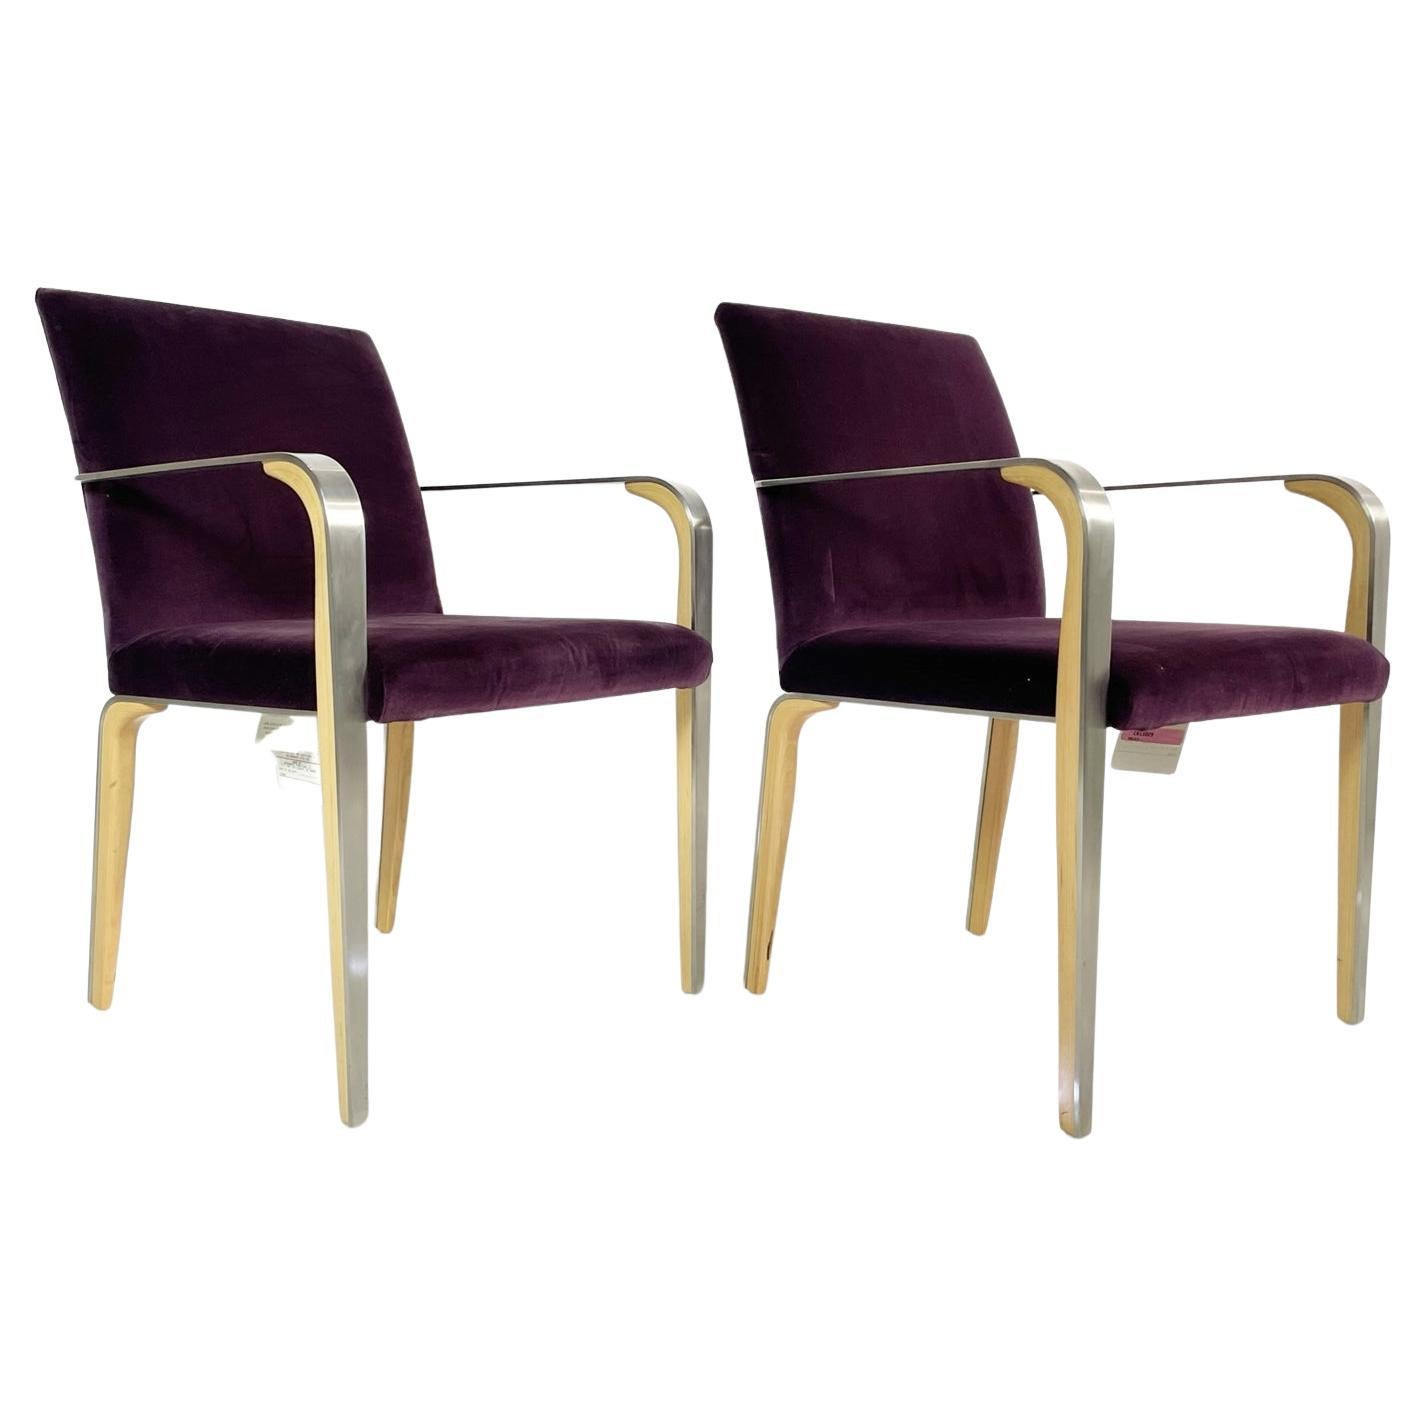 Pair of Armchairs with Metal & Wood Frames by Bernhardt For Sale